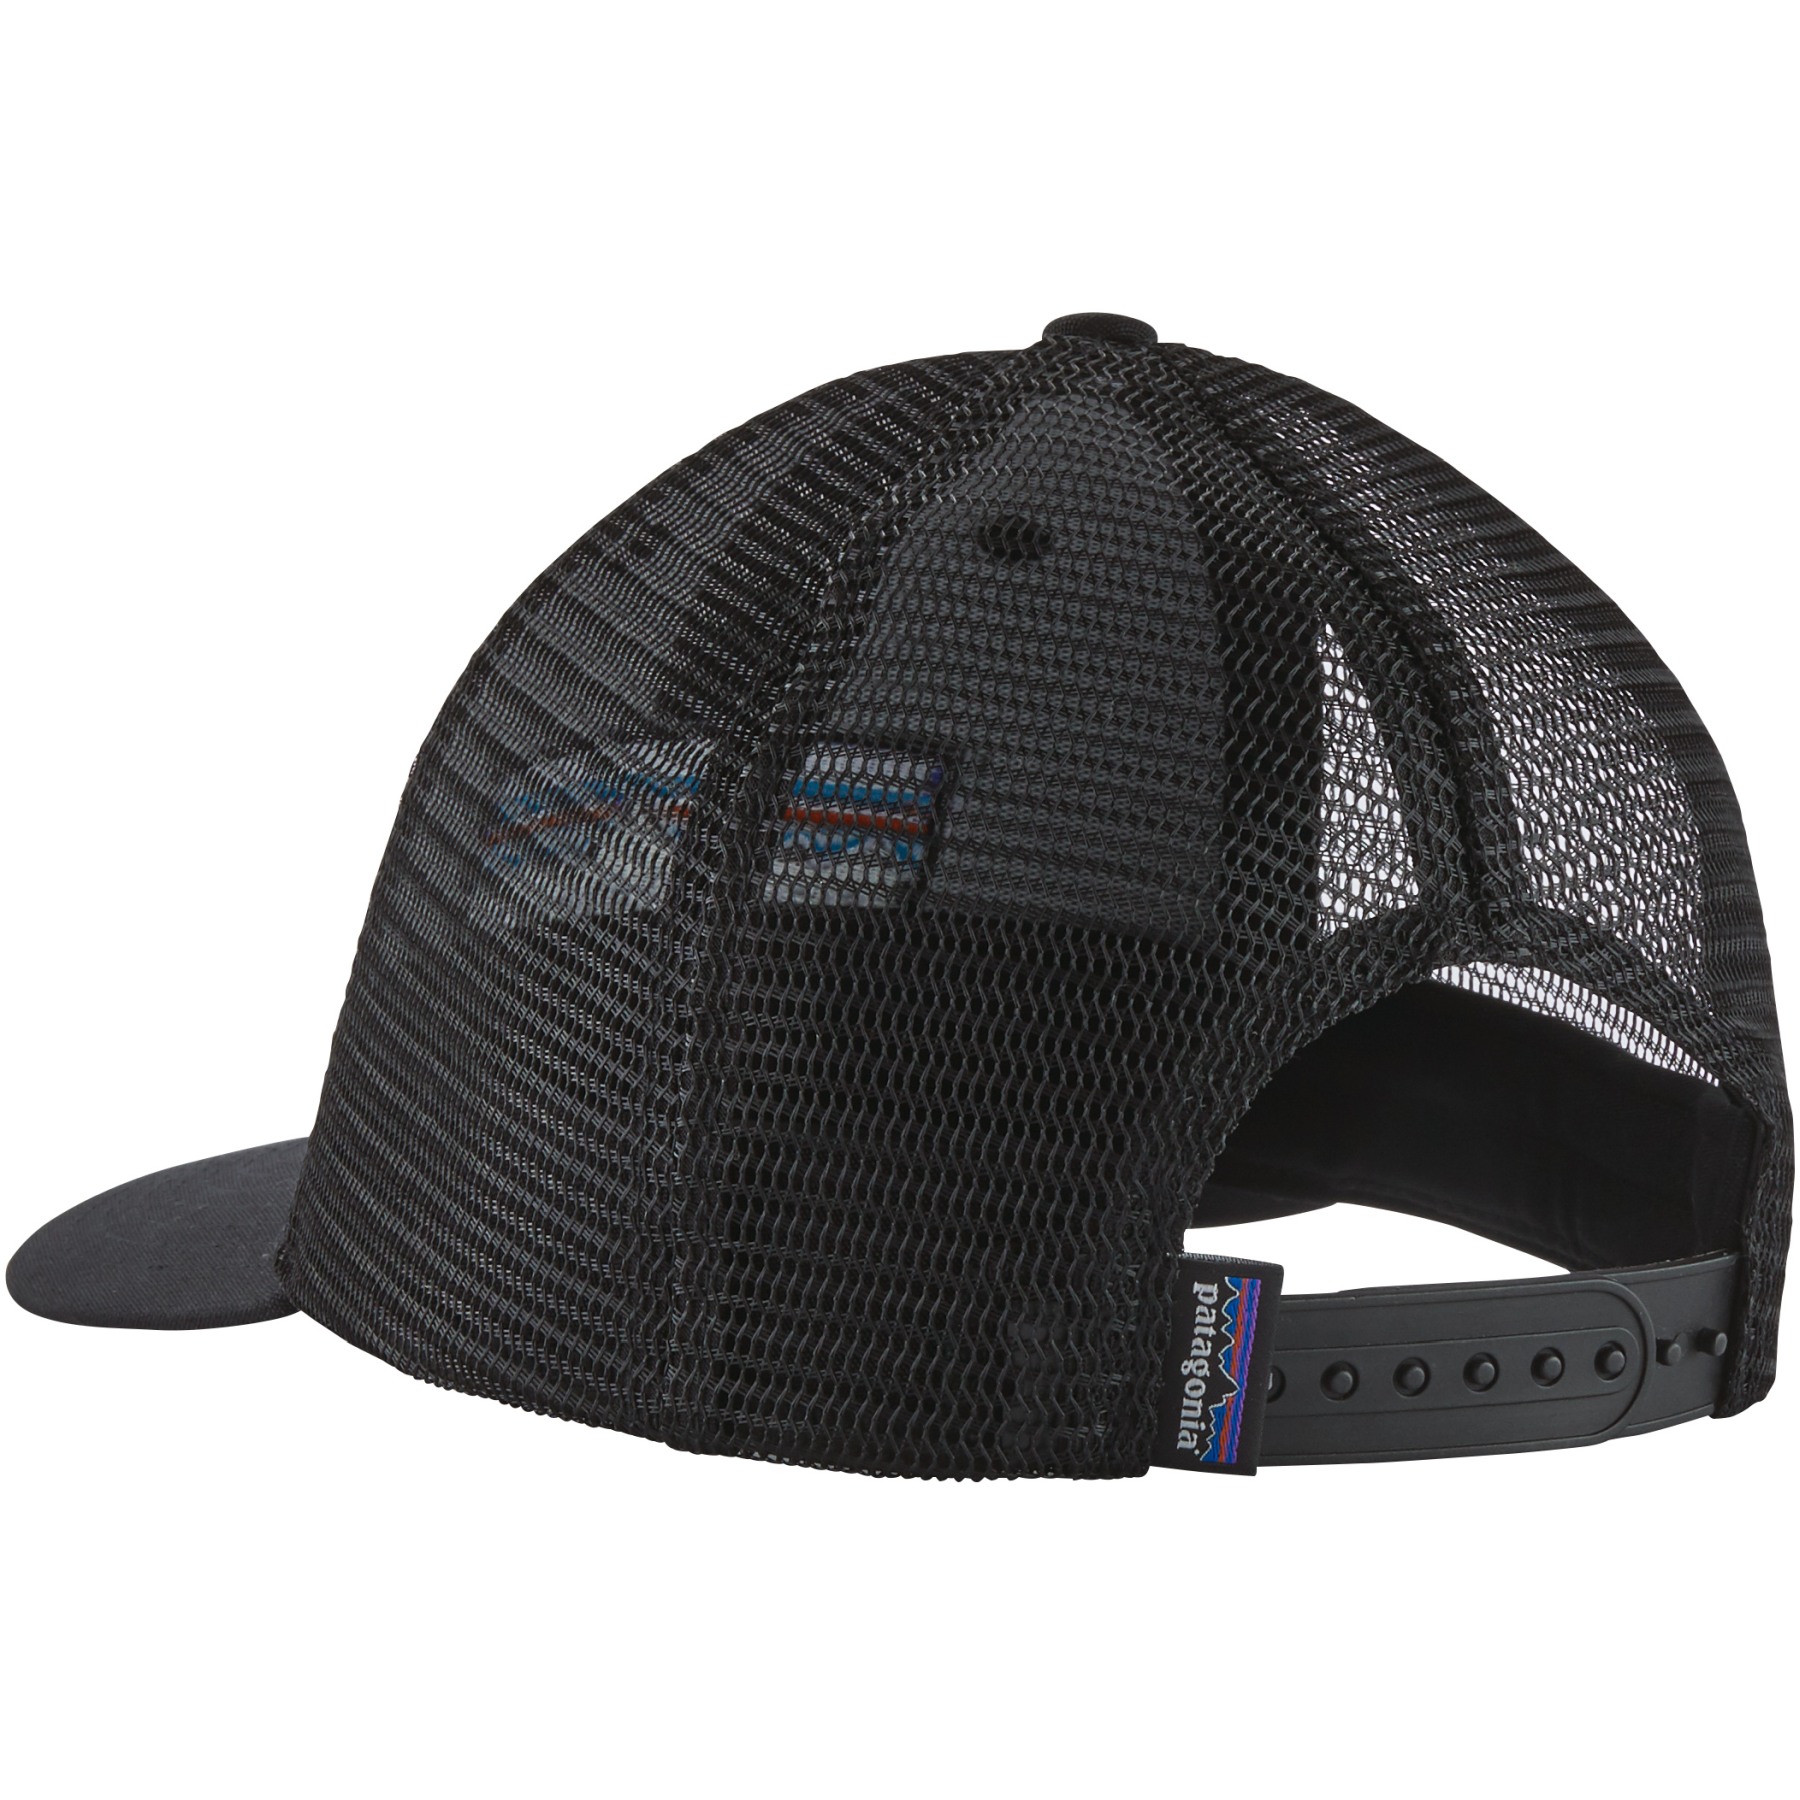 Patagonia Casquette P-6 LoPro Trucker - Homme